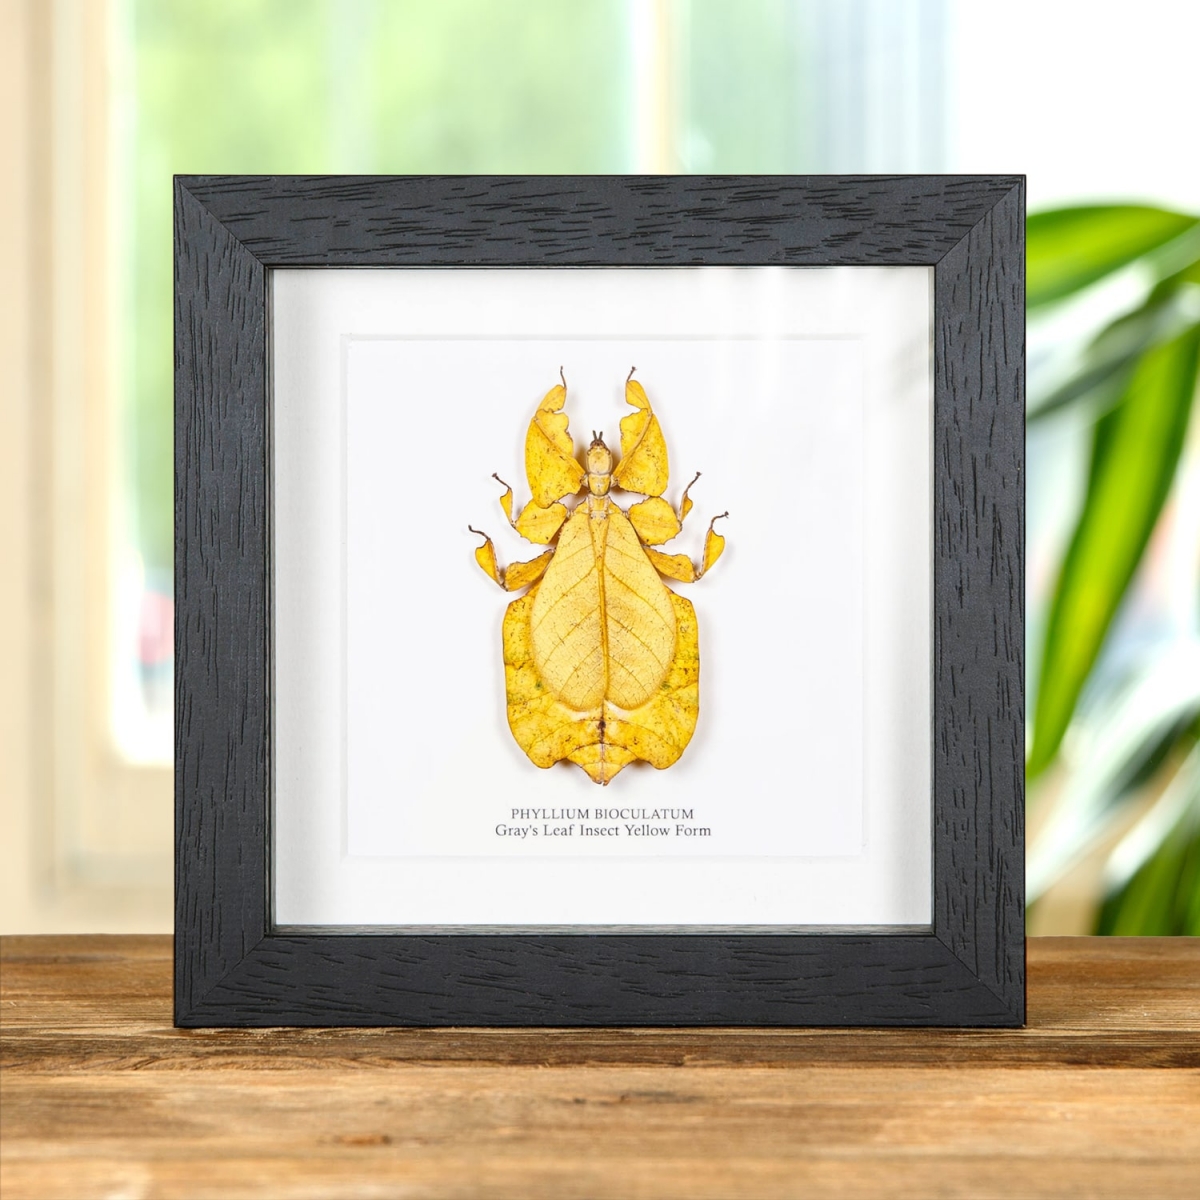 Minibeast Gray's Leaf Insect Yellow Form in Box Frame (Phyllium bioculatum)